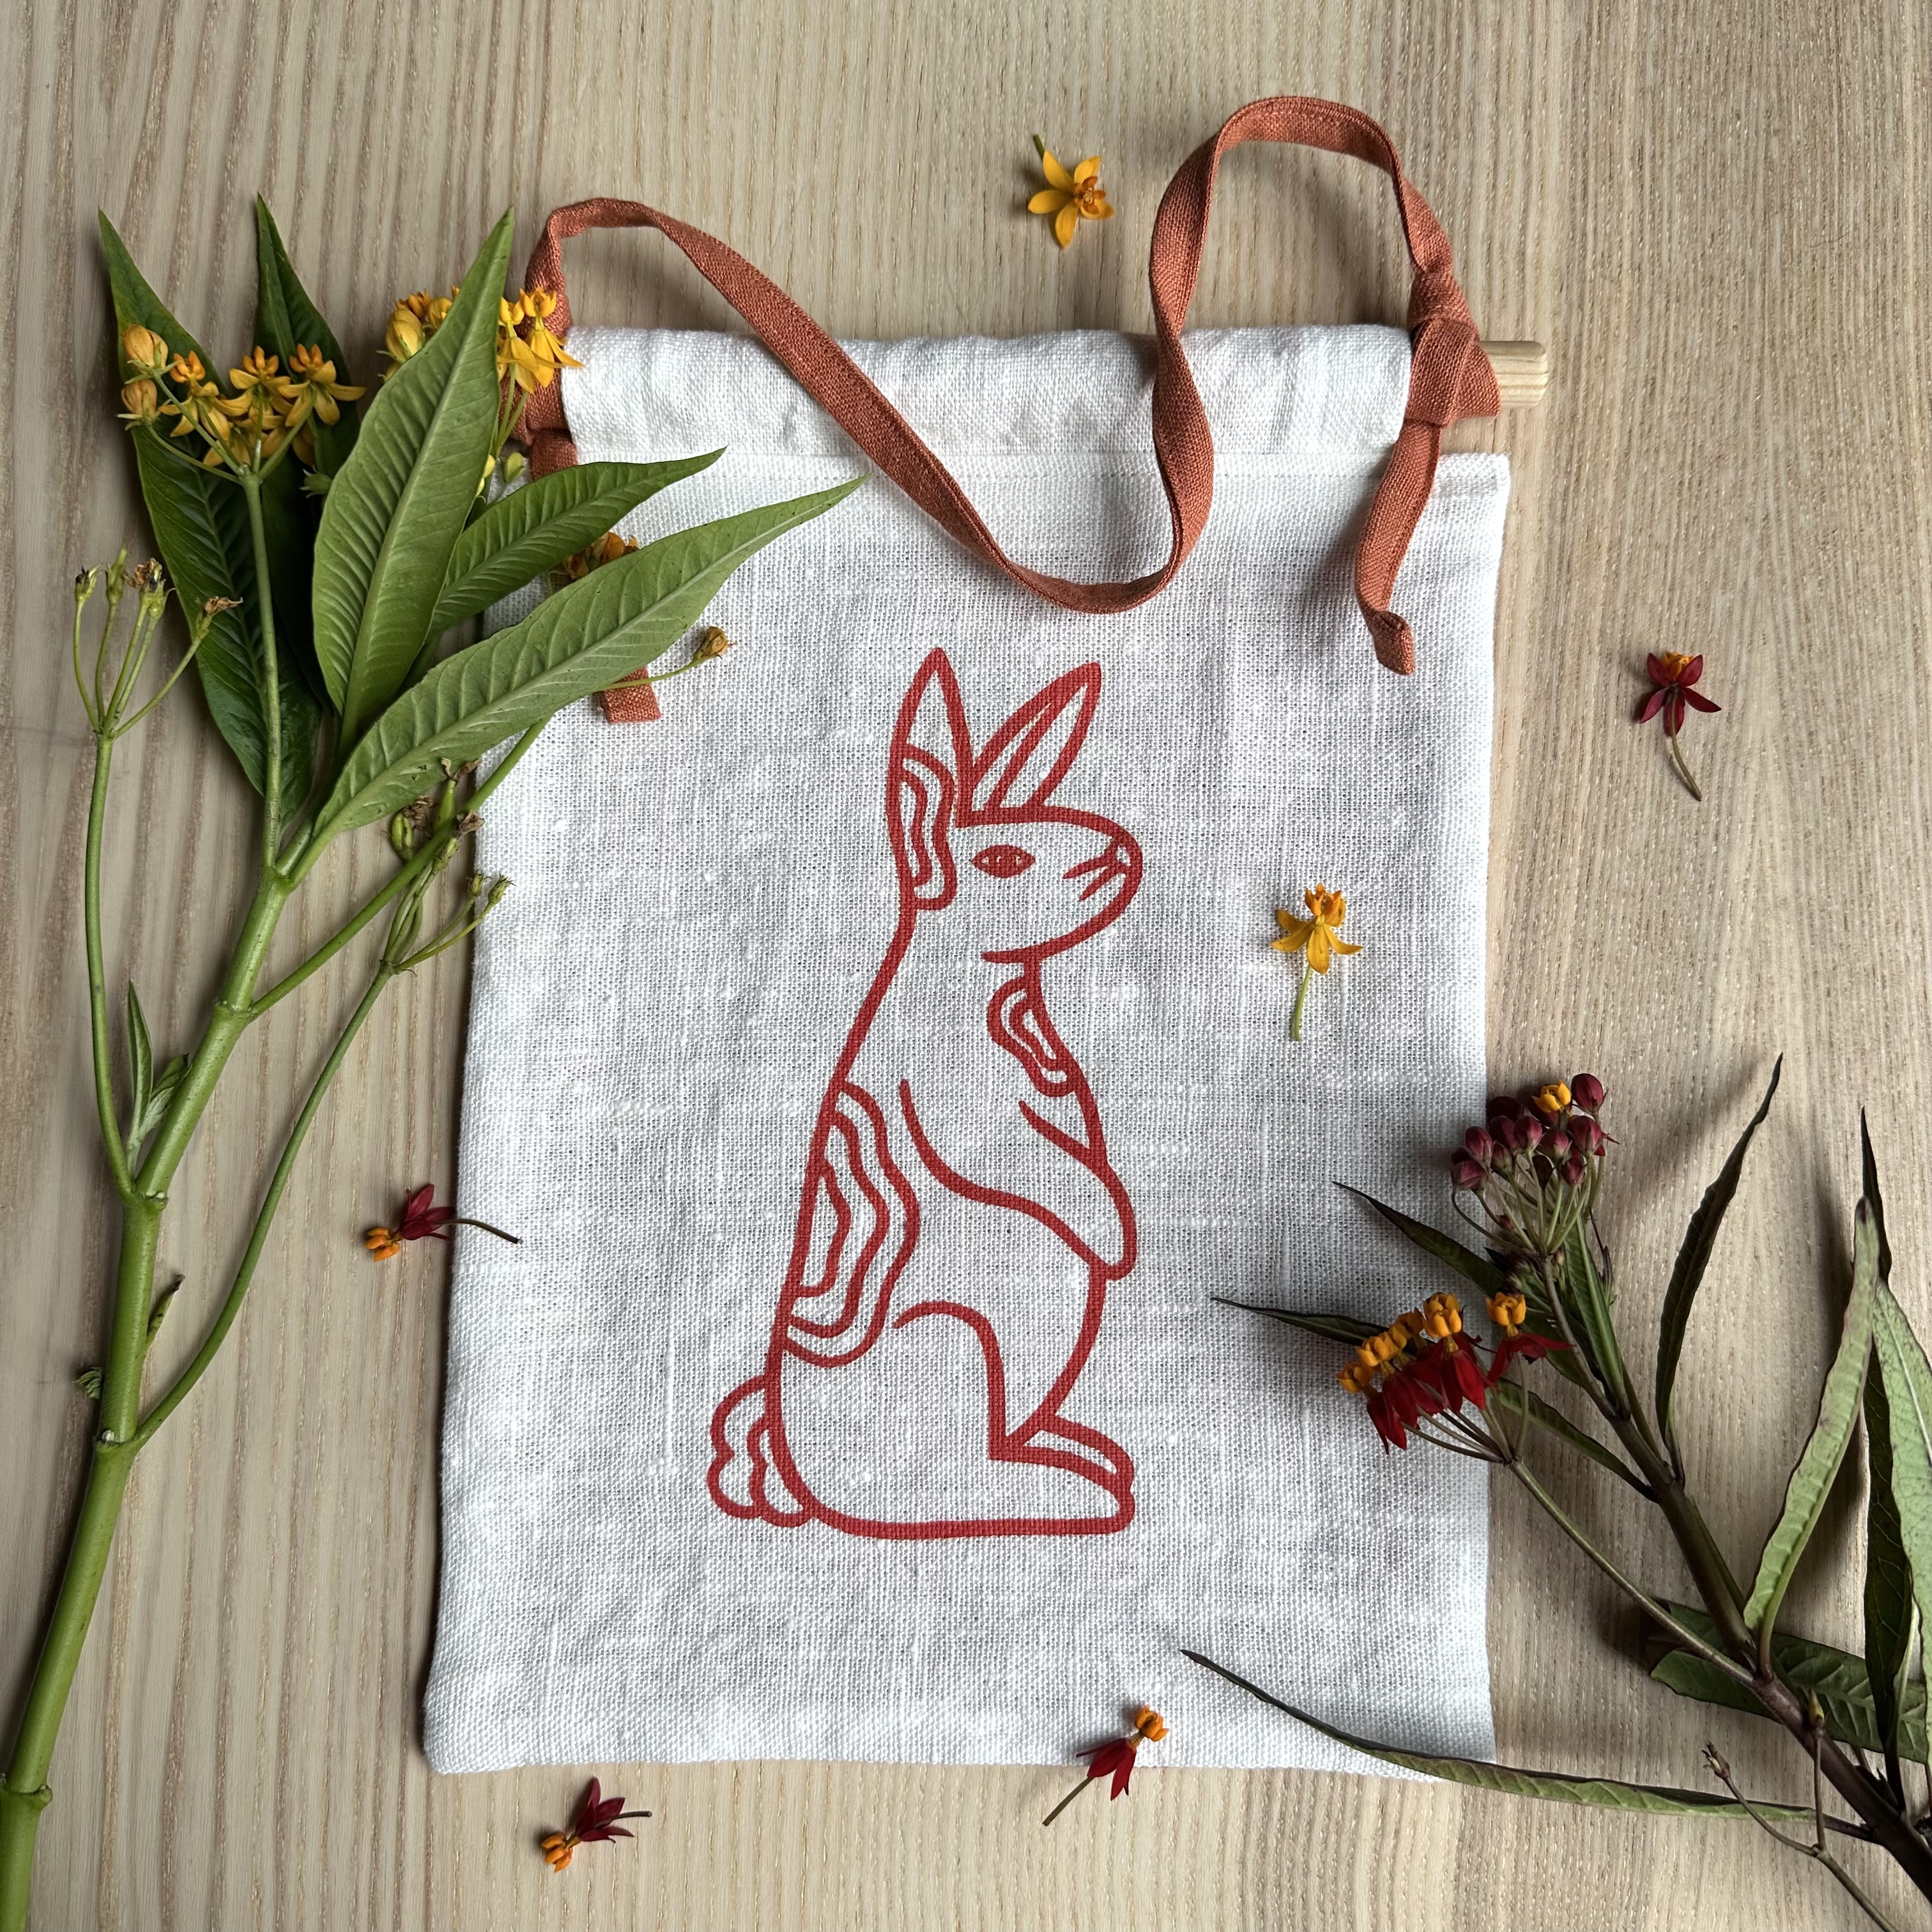 Linen wall-hanging with red rabbit design amongst scattered flowers